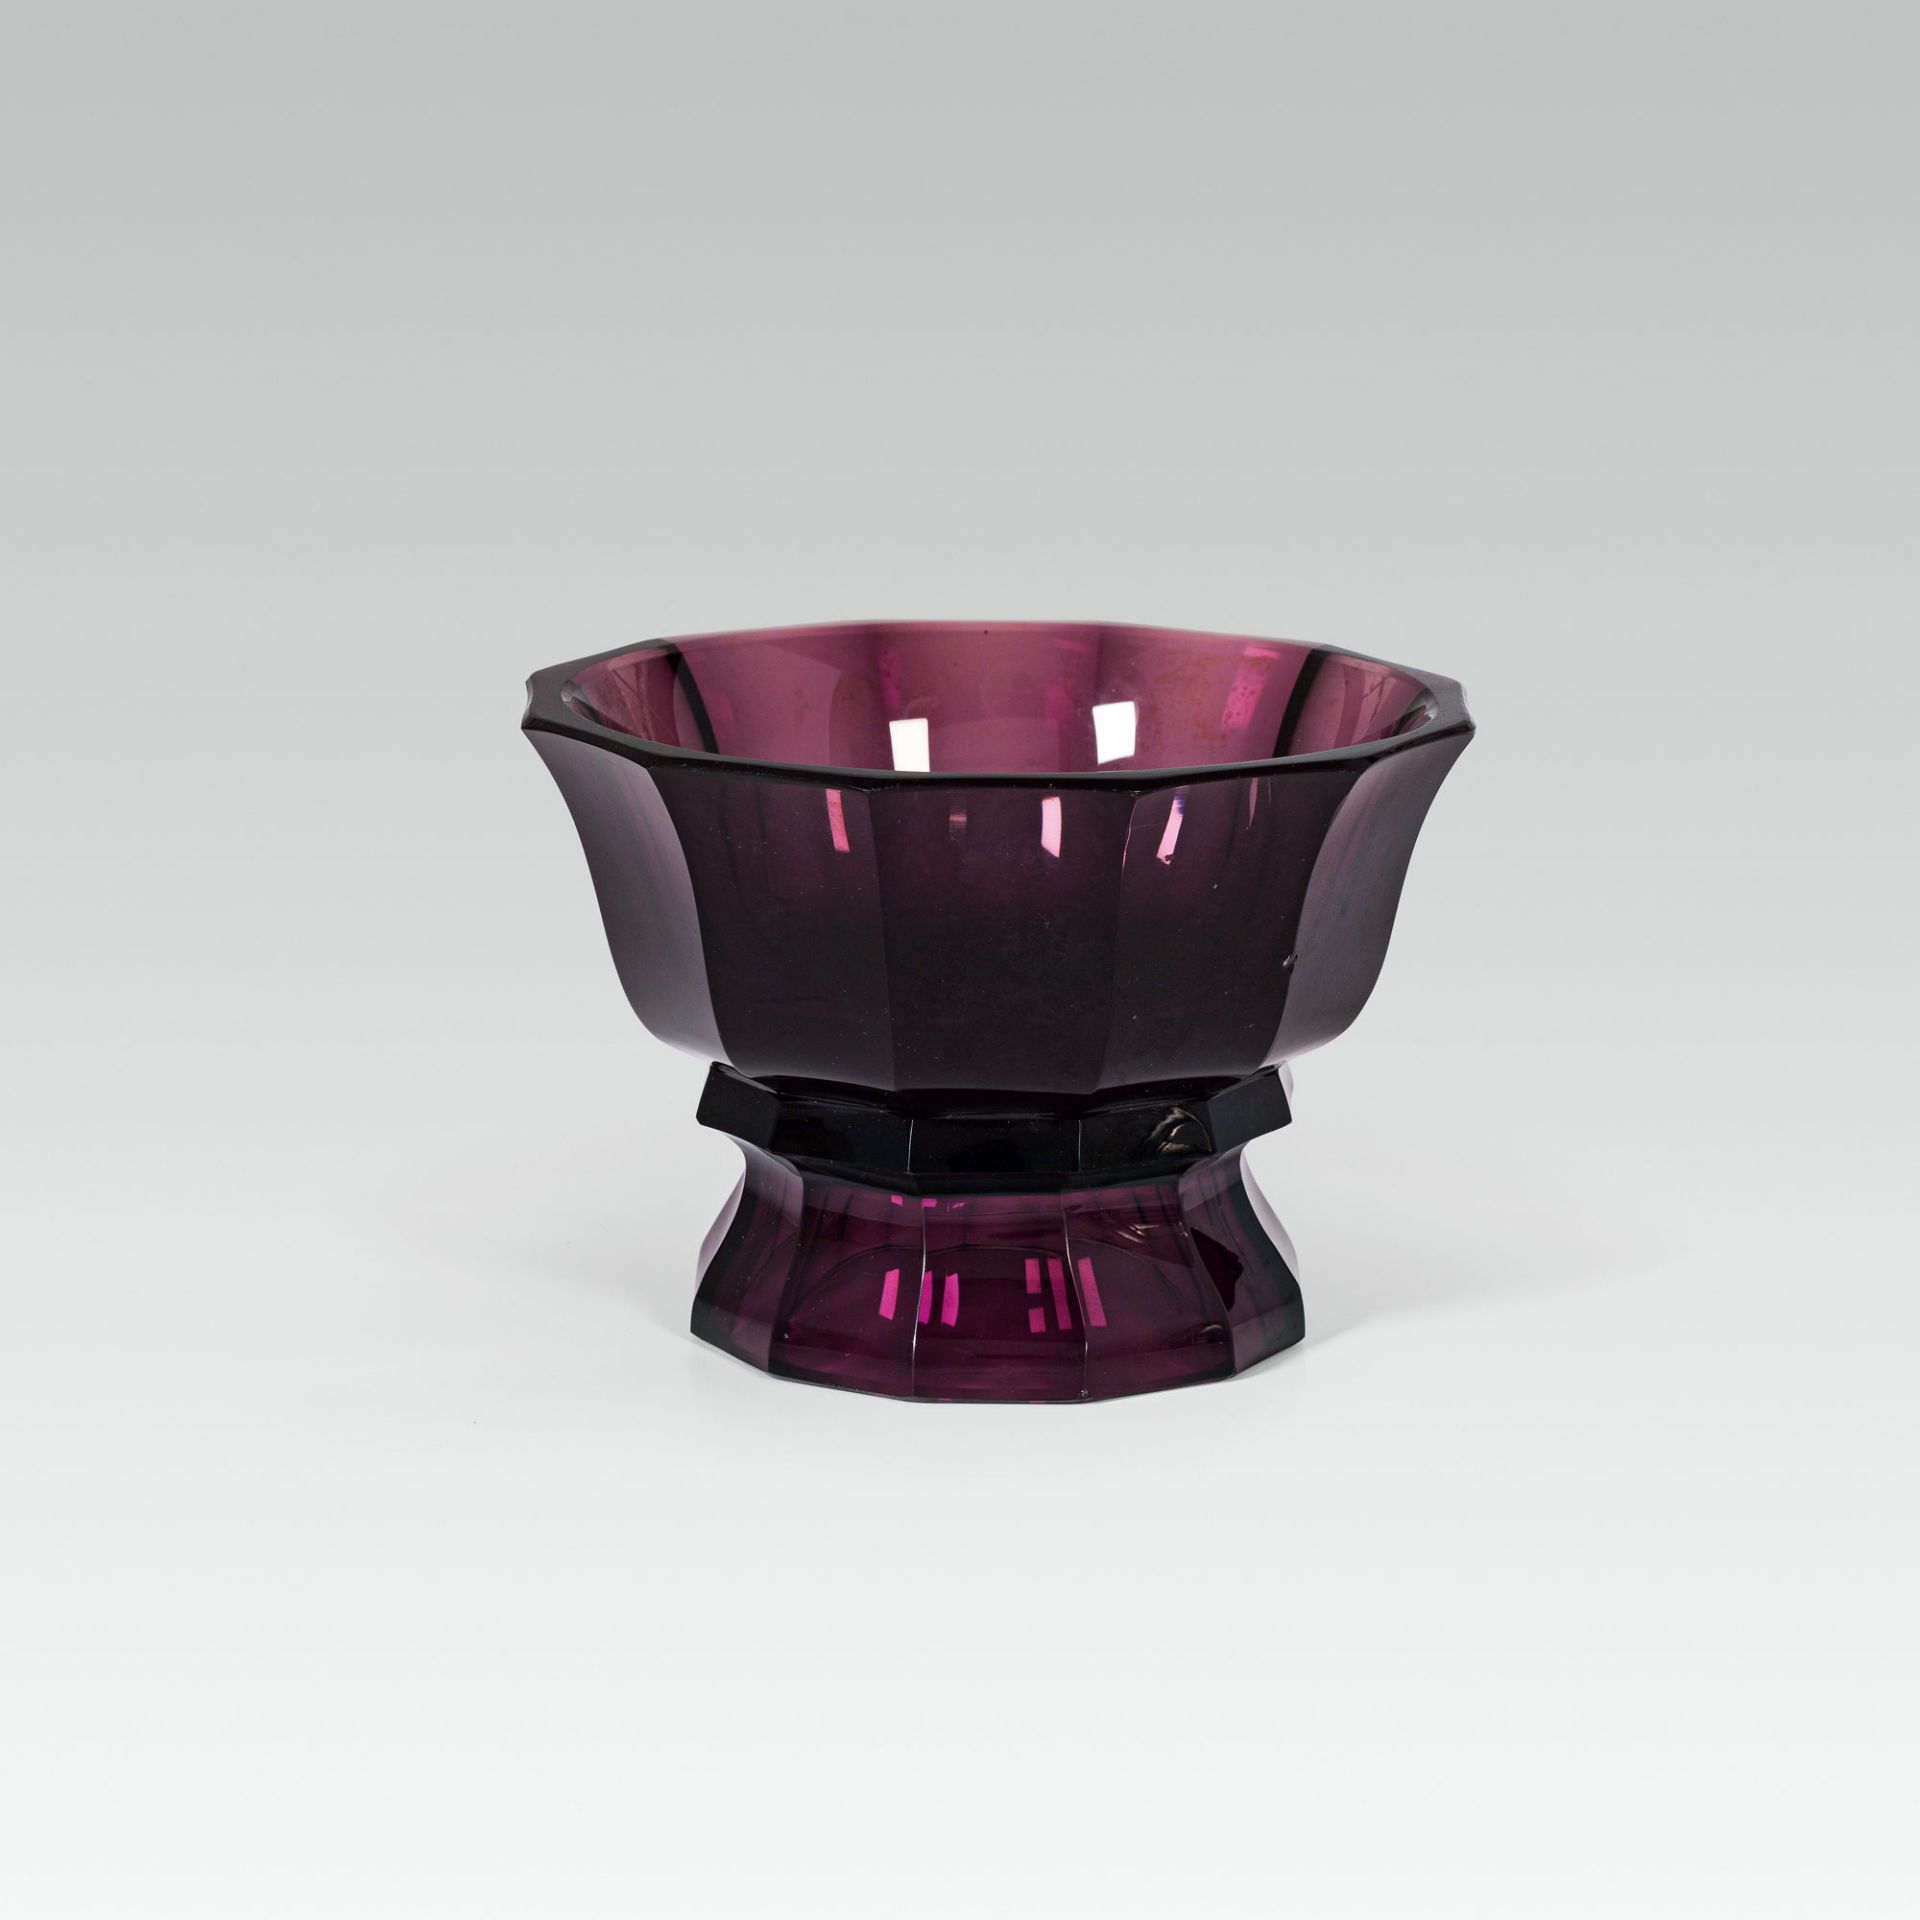 Josef HoffmannBowlpurple glass; on the lower surface etched marked: company signature "WW";